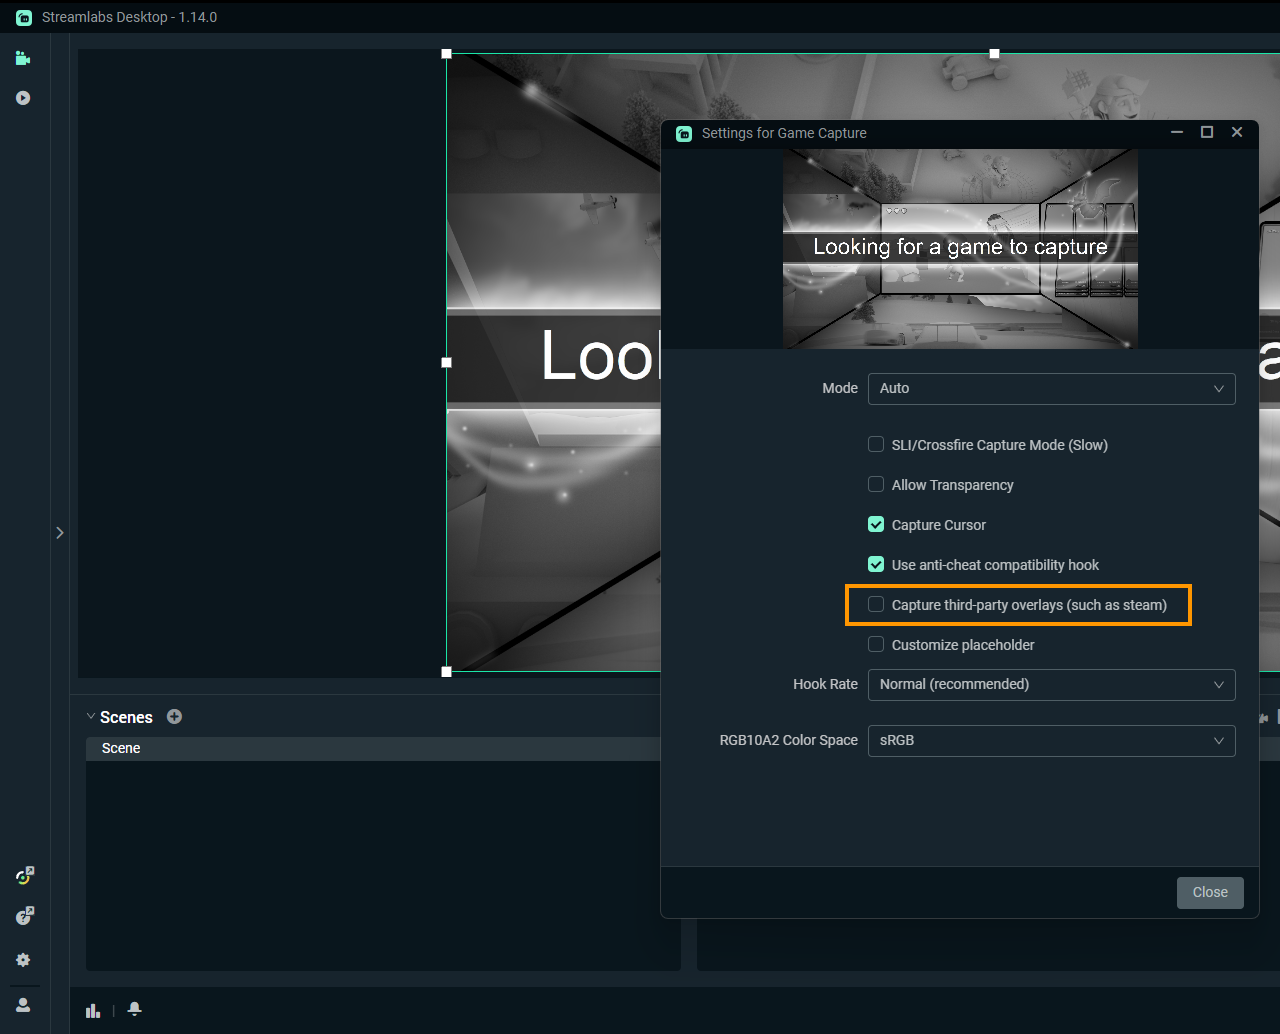 How to Fix Thrid-Party Overlays Not Appearing in StreamLabs